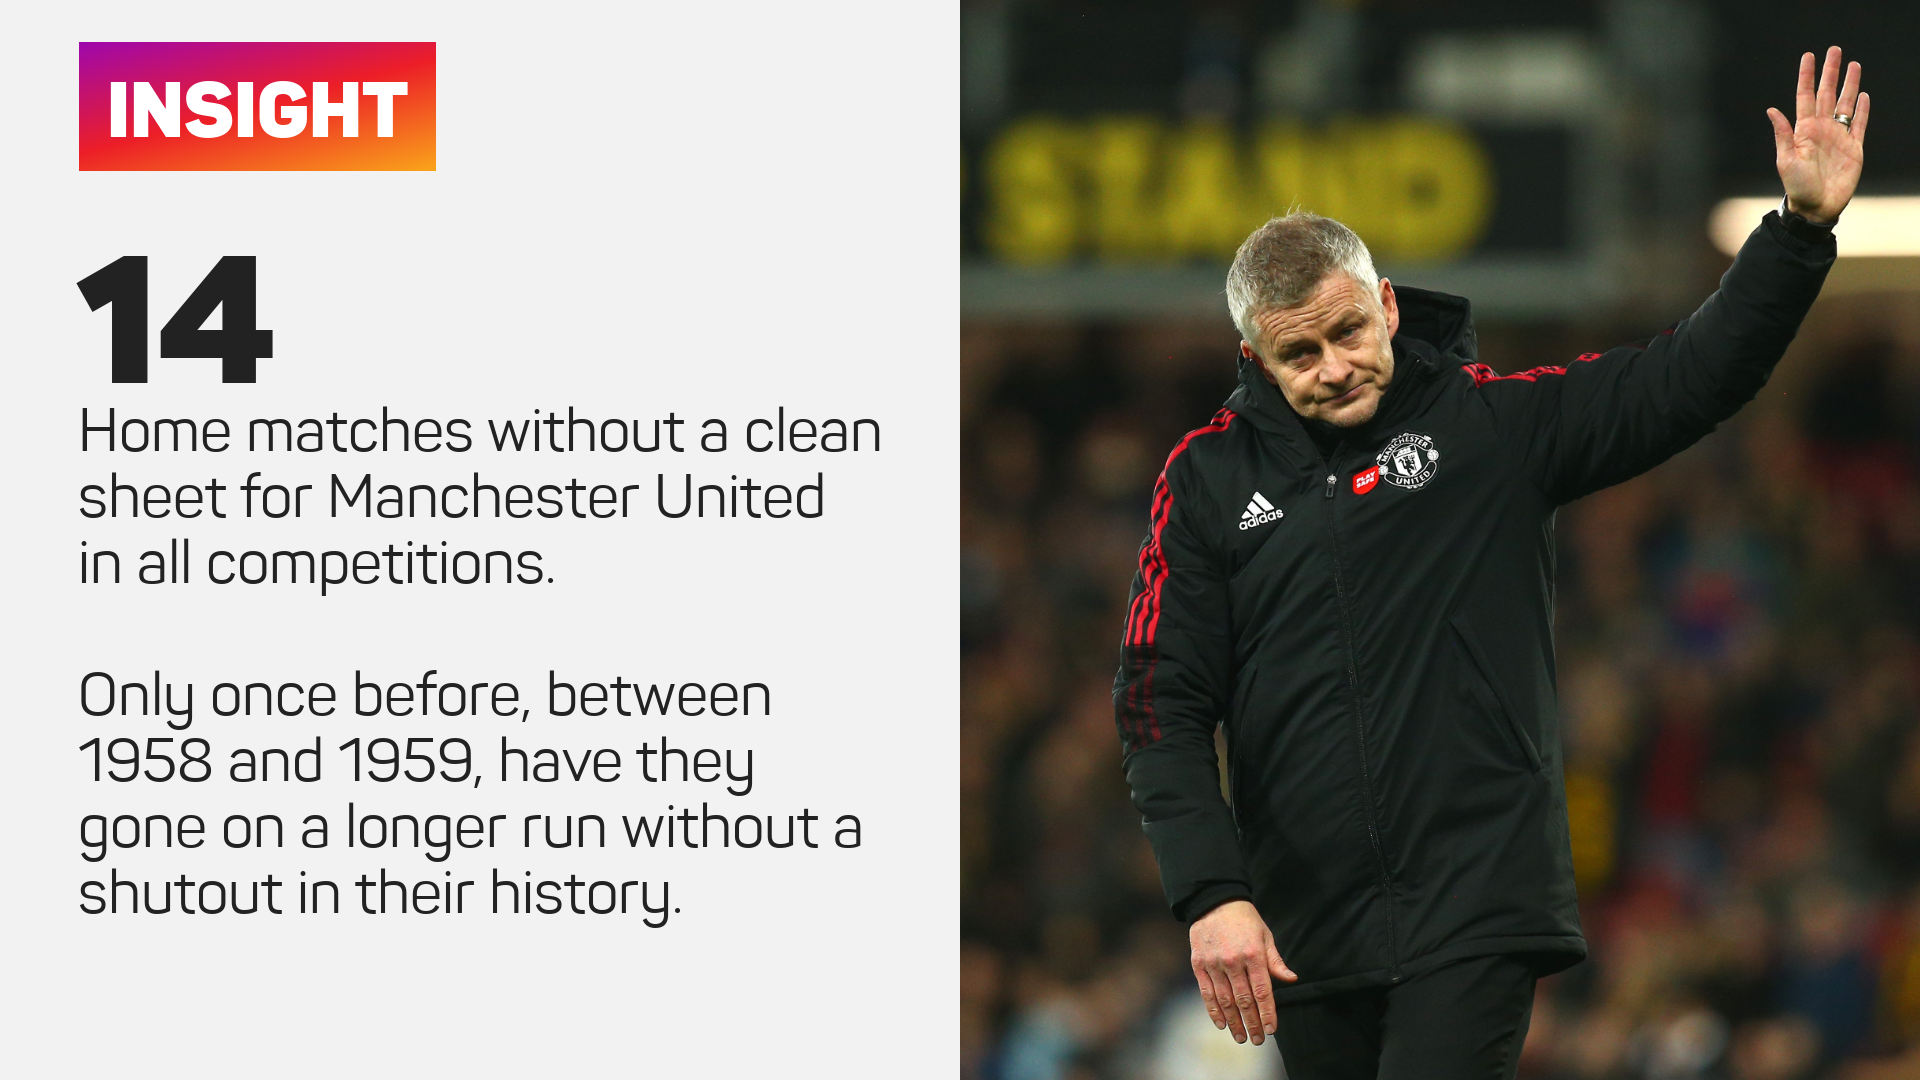 Manchester United have gone 14 home matches without a clean sheet